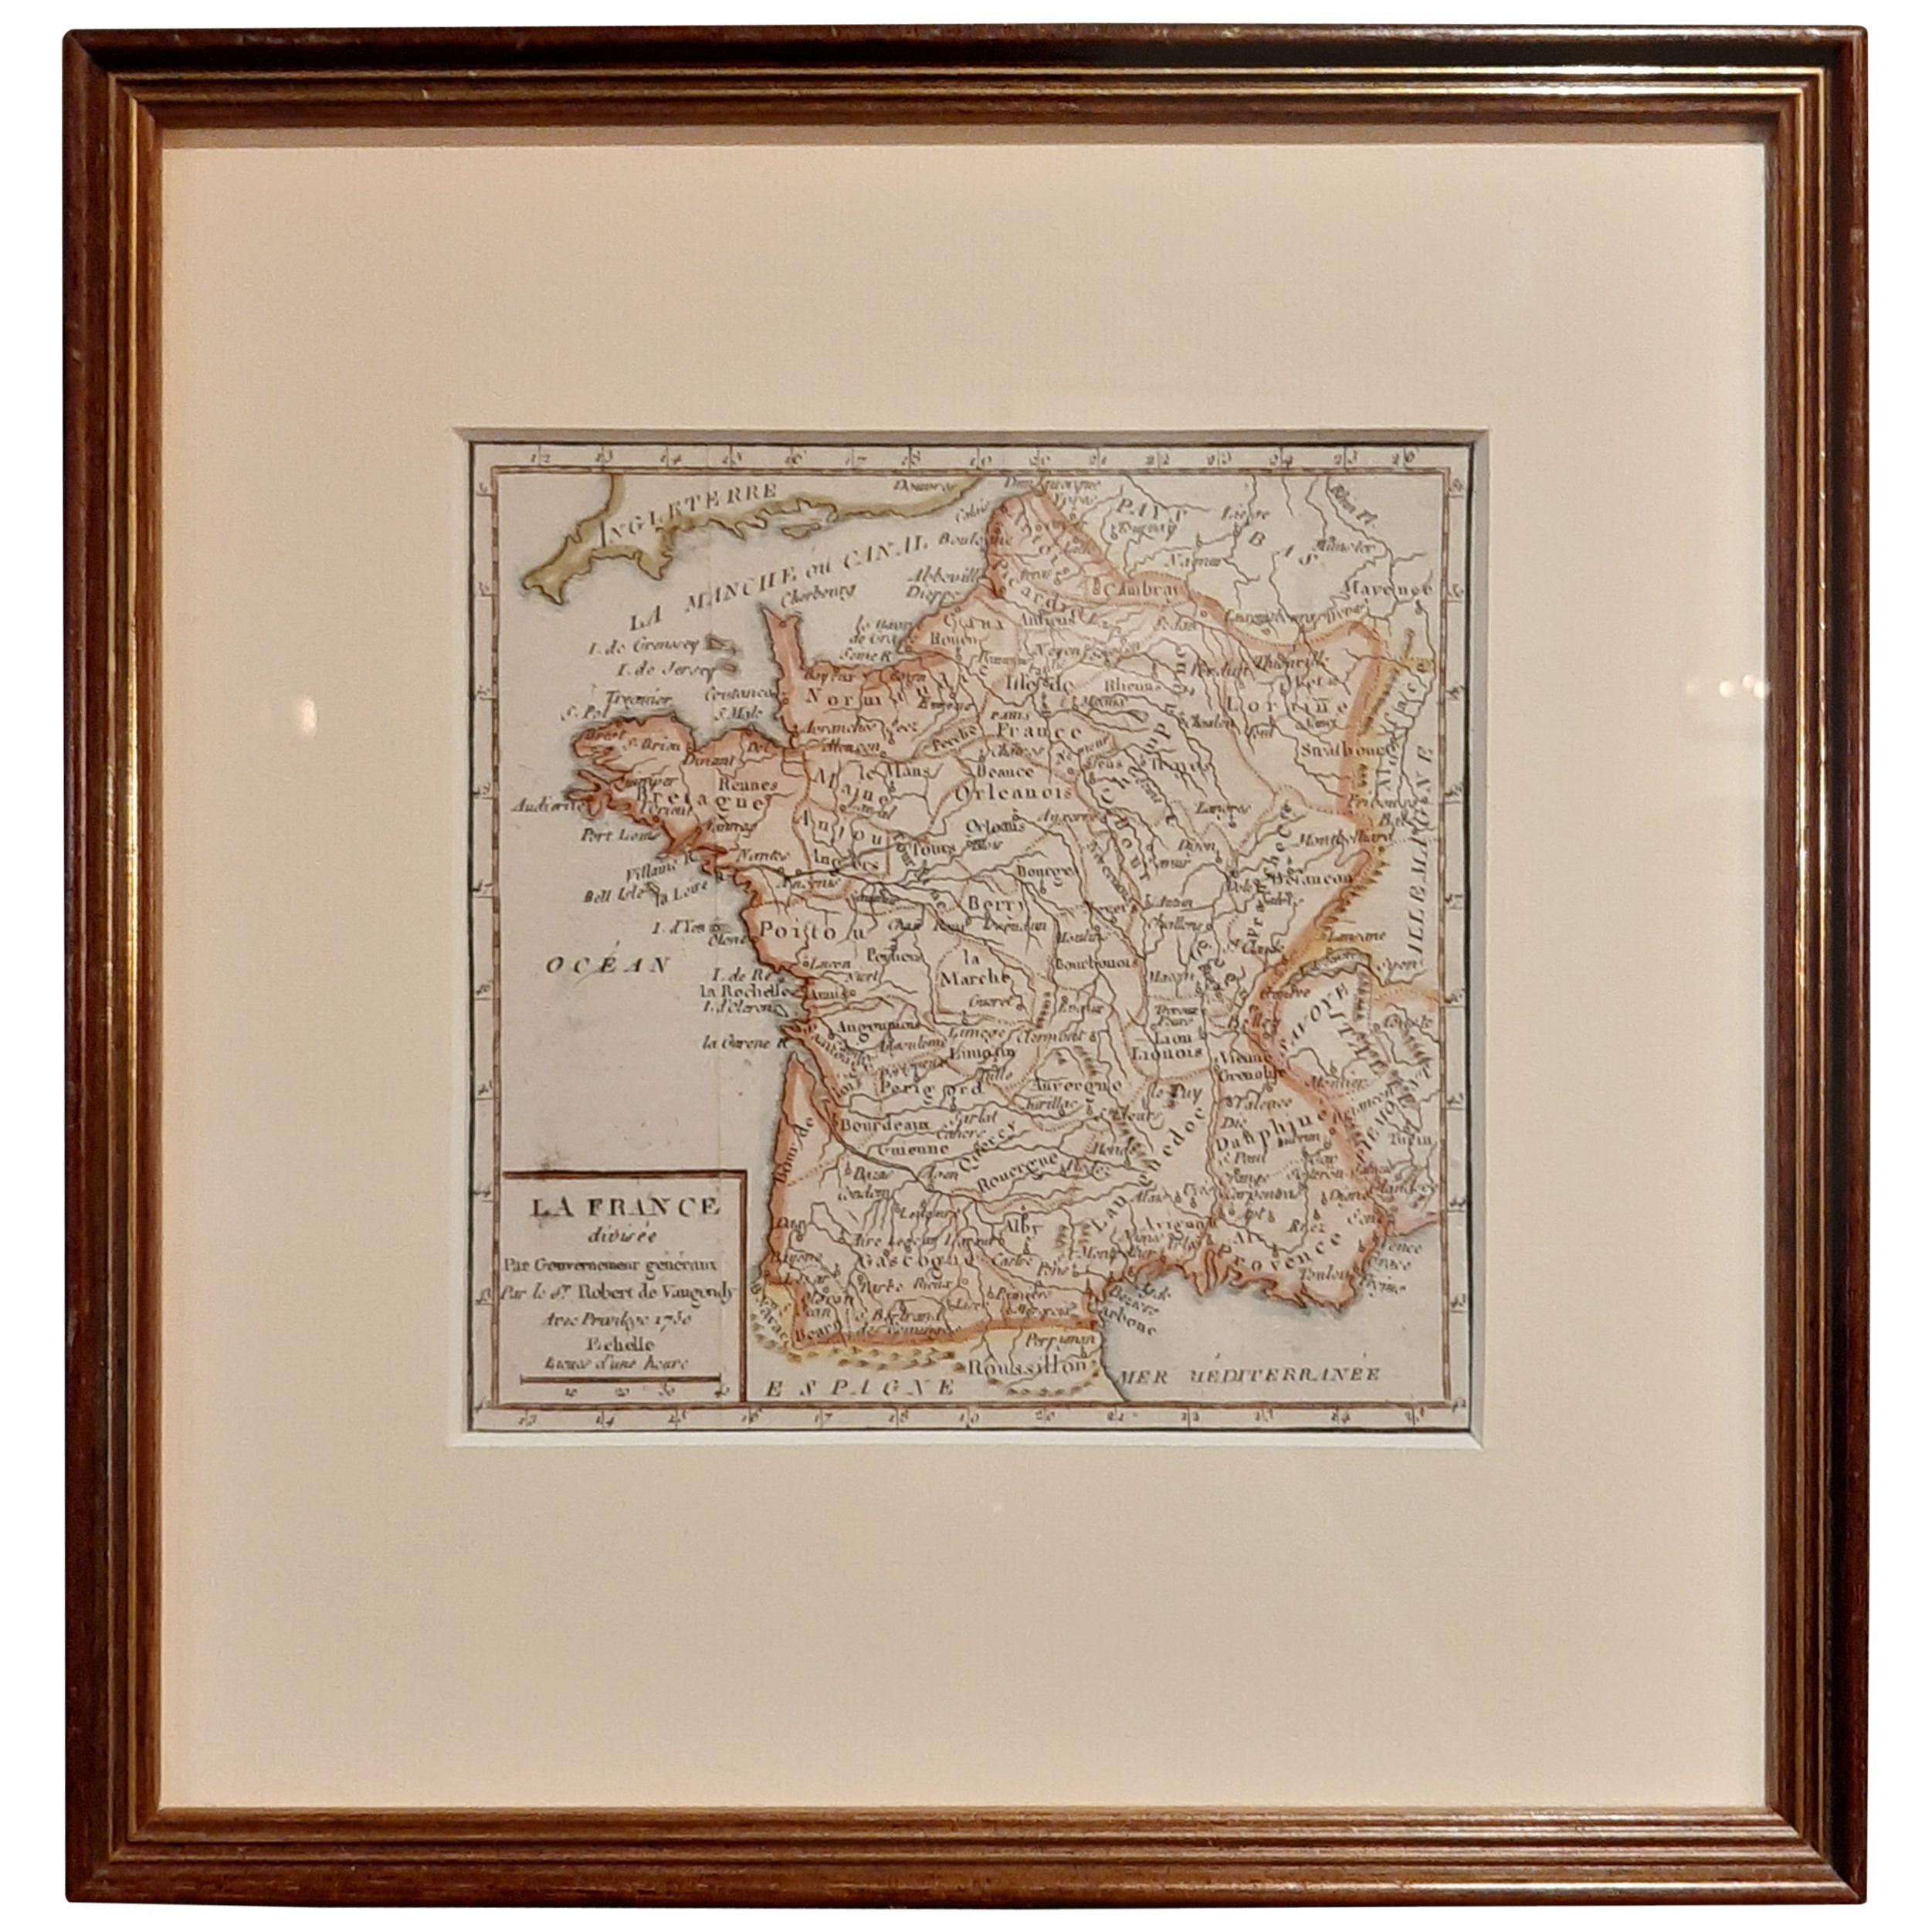 Antique Map of France by Vaugondy, circa 1750